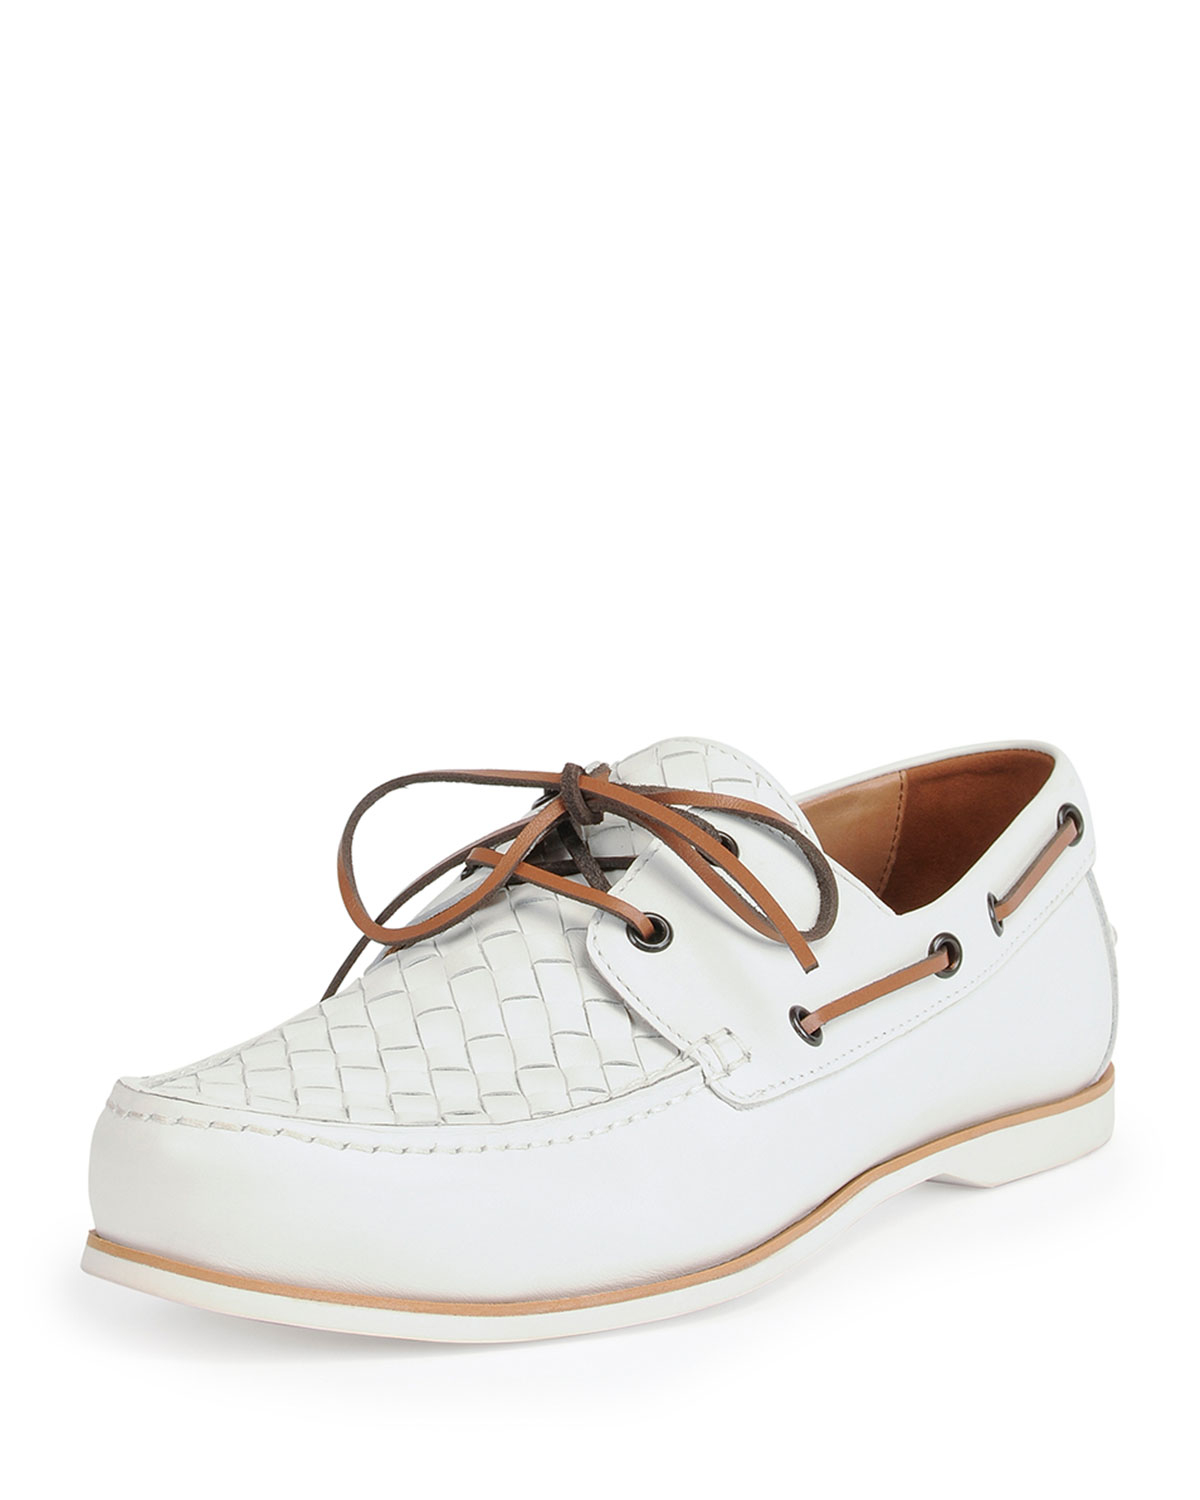 white leather boat shoes mens